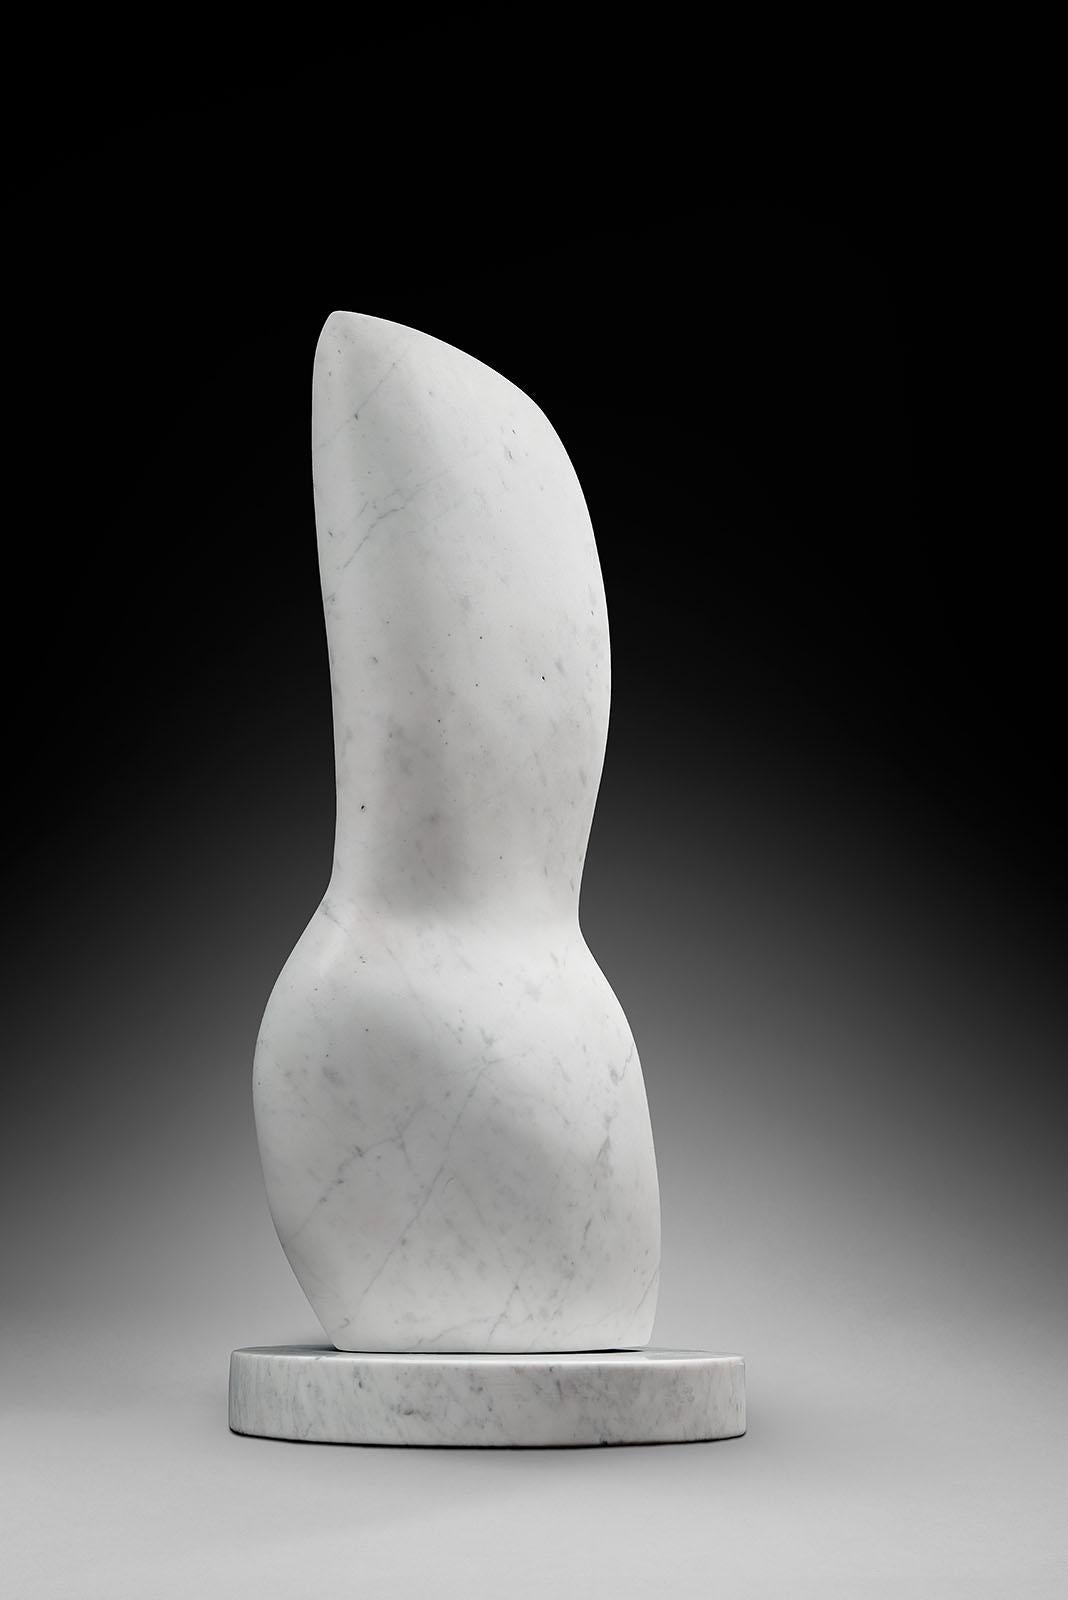 Liptay Mathias. Born in Kalocsa (Hongria) in 1936.
Direct carving in Carrara marble, signed Mathias L, unique piece.

Measures: Height 67 cm 
Width 27 cm 
Depth 17 cm


Height 5 cm
Diameter 33 cm

Biography
Came to Paris at the age of